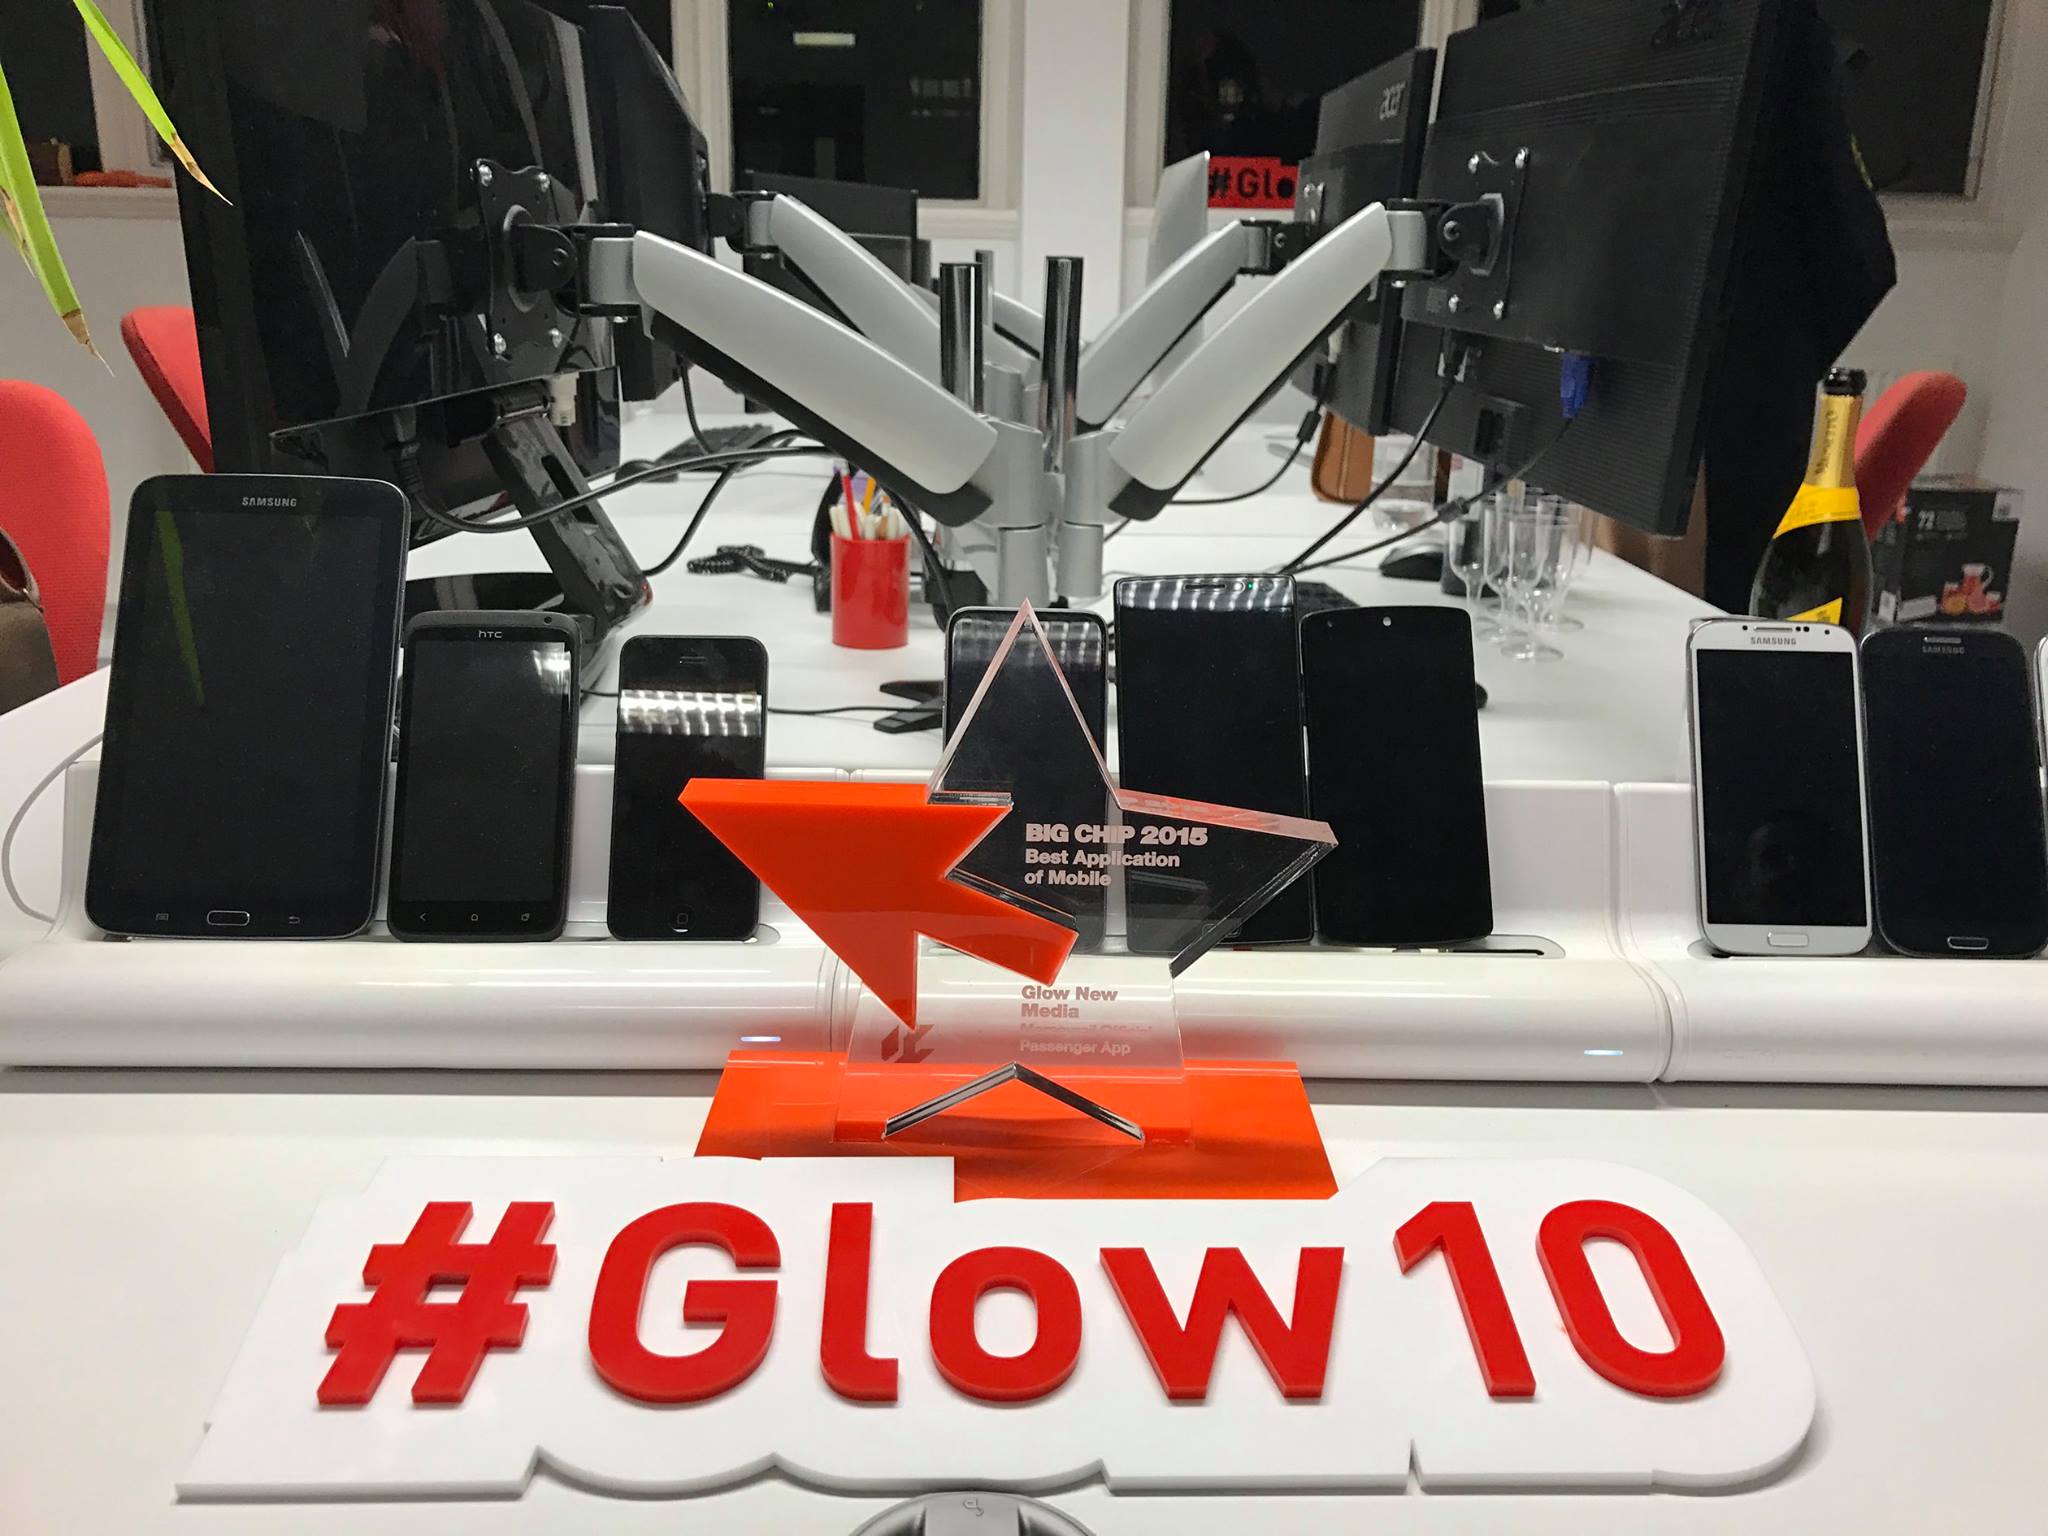 Glow10 sign with a Big Chip award